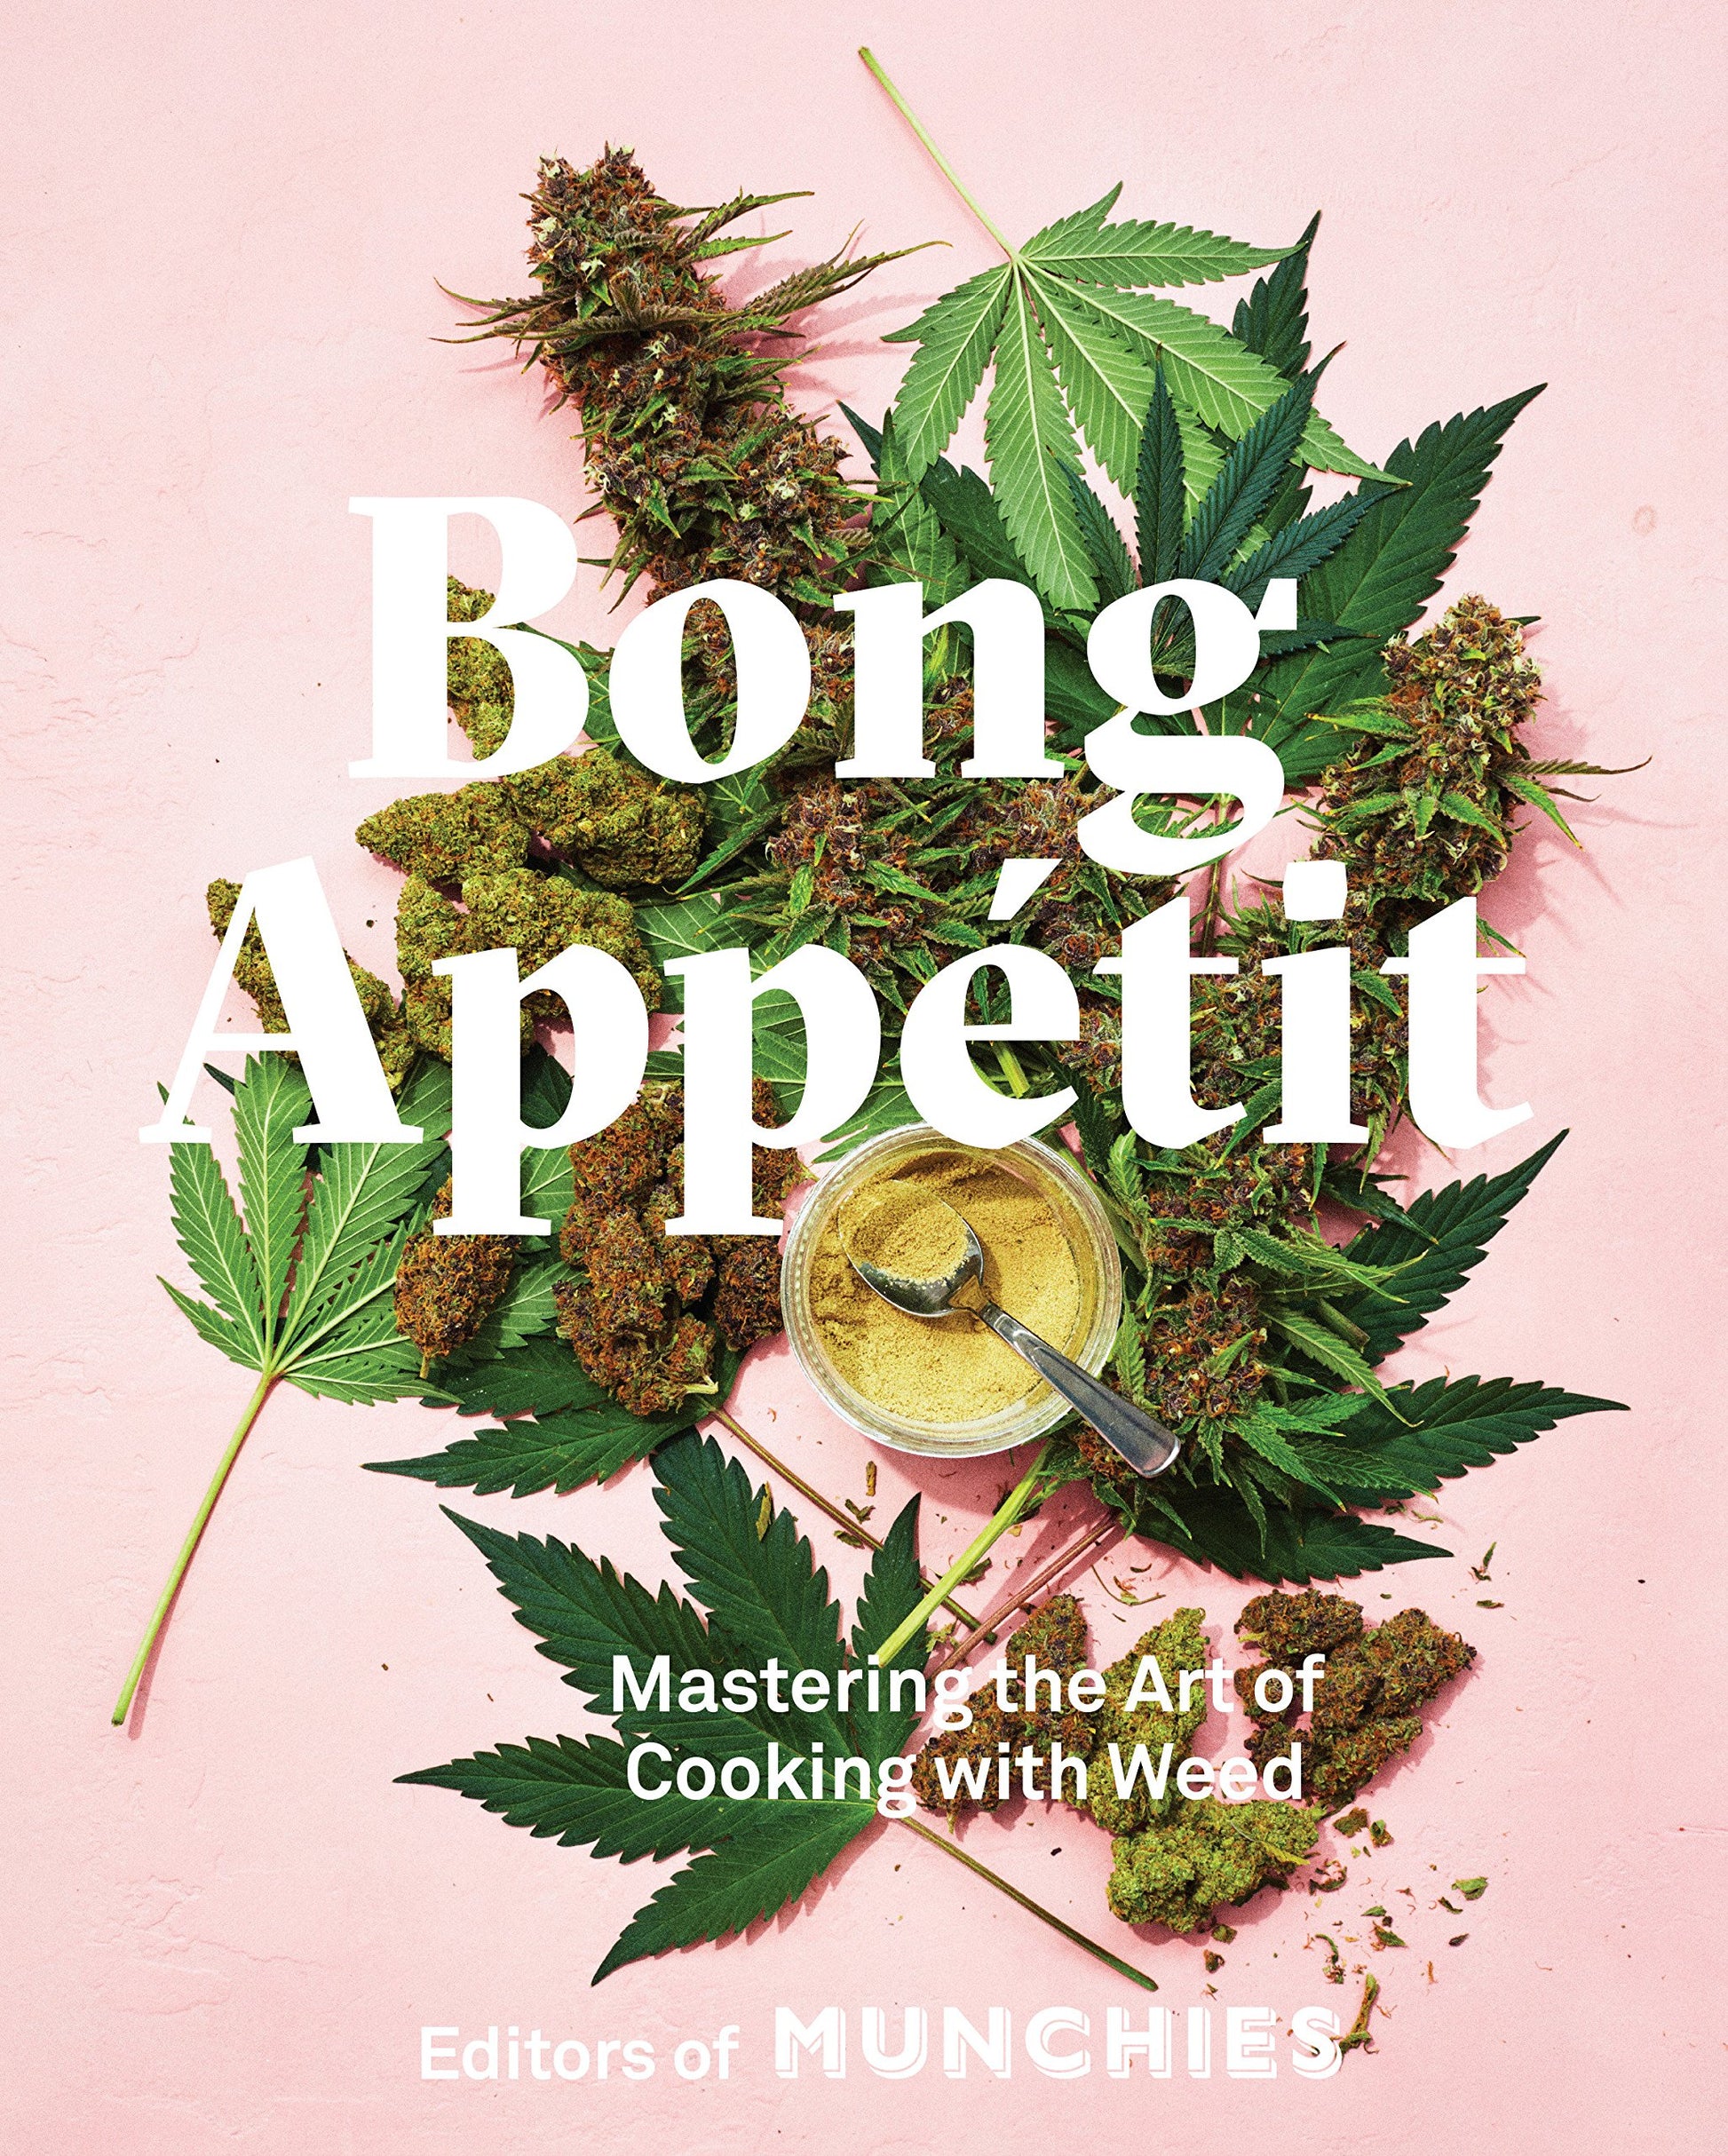 Bong Appétit: Mastering the Art of Cooking with Weed by The Editors of Munchies